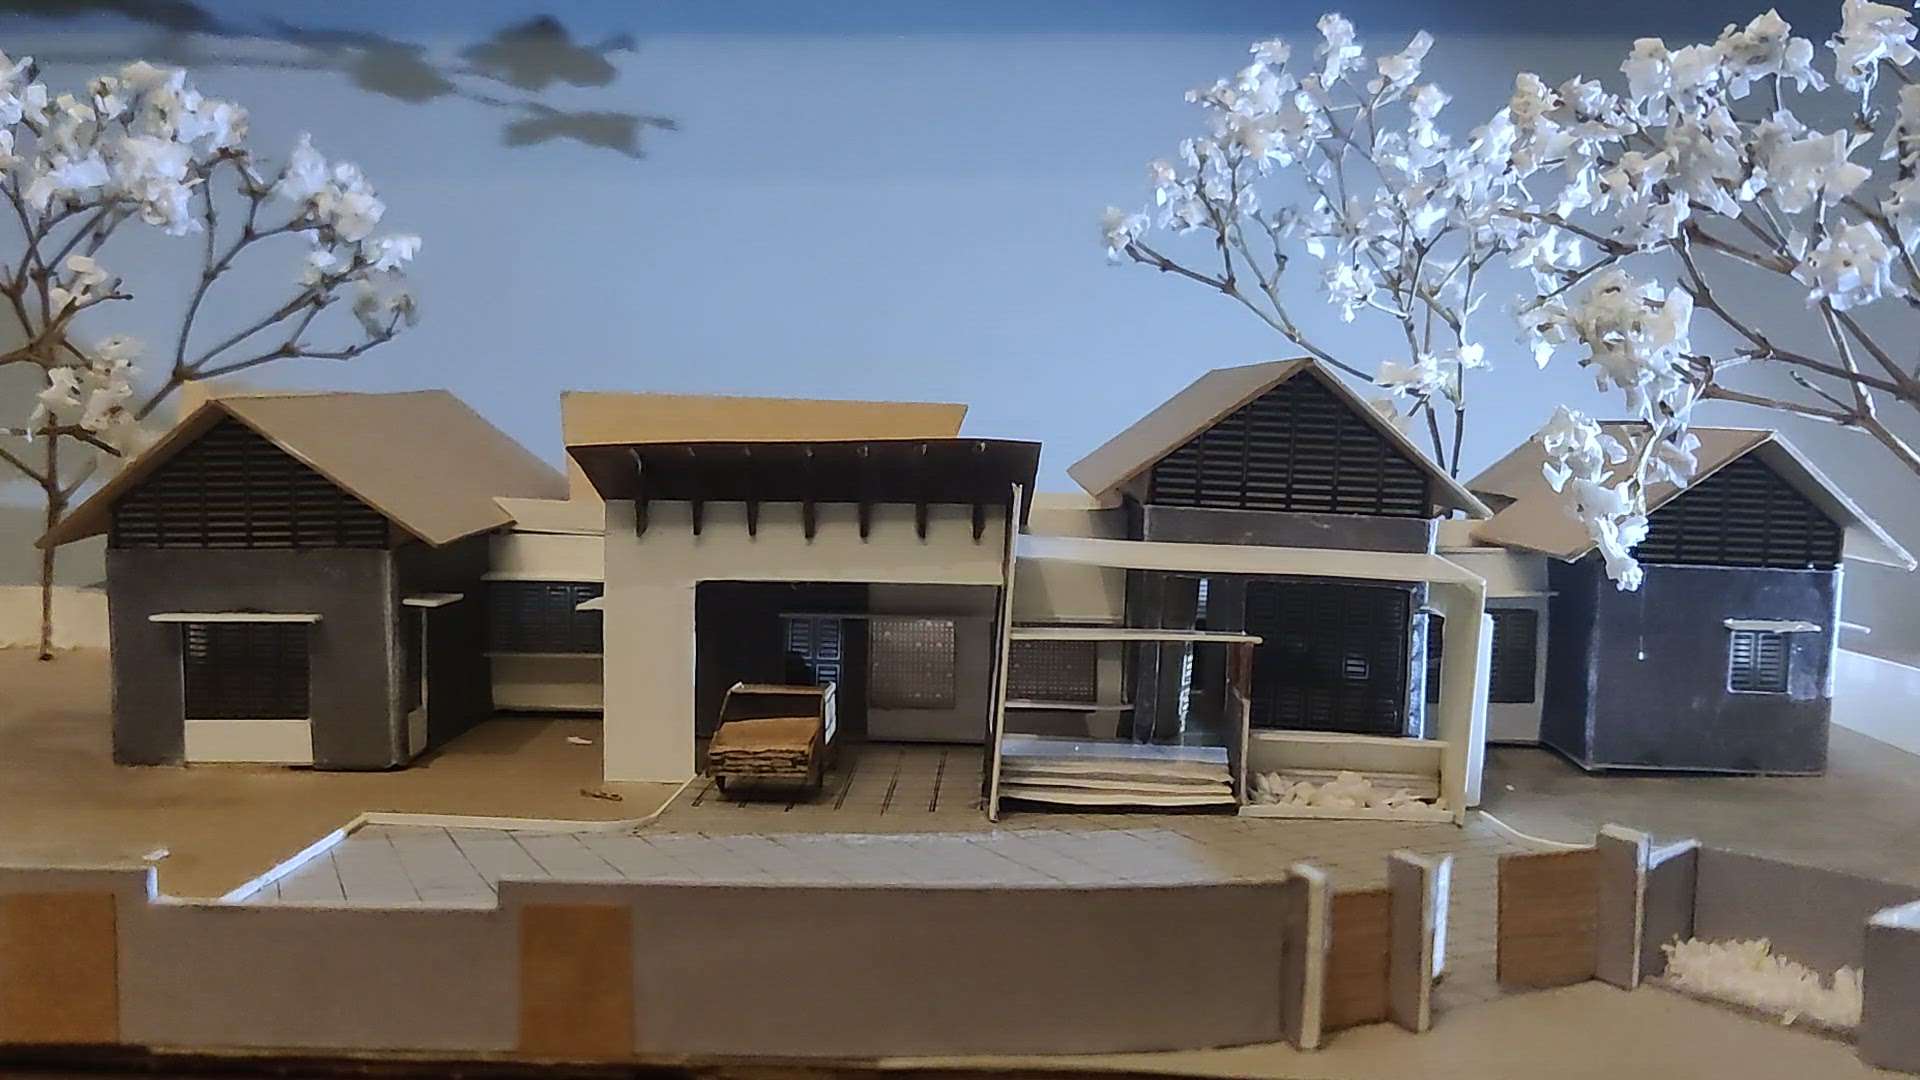 Physical model making

 #Architect  #architecturedesigns  #ContemporaryHouse  #SlopingRoofHouse  #slopingroof  #4BHKPlans  #4BHKHouse  #SingleFloorHouse